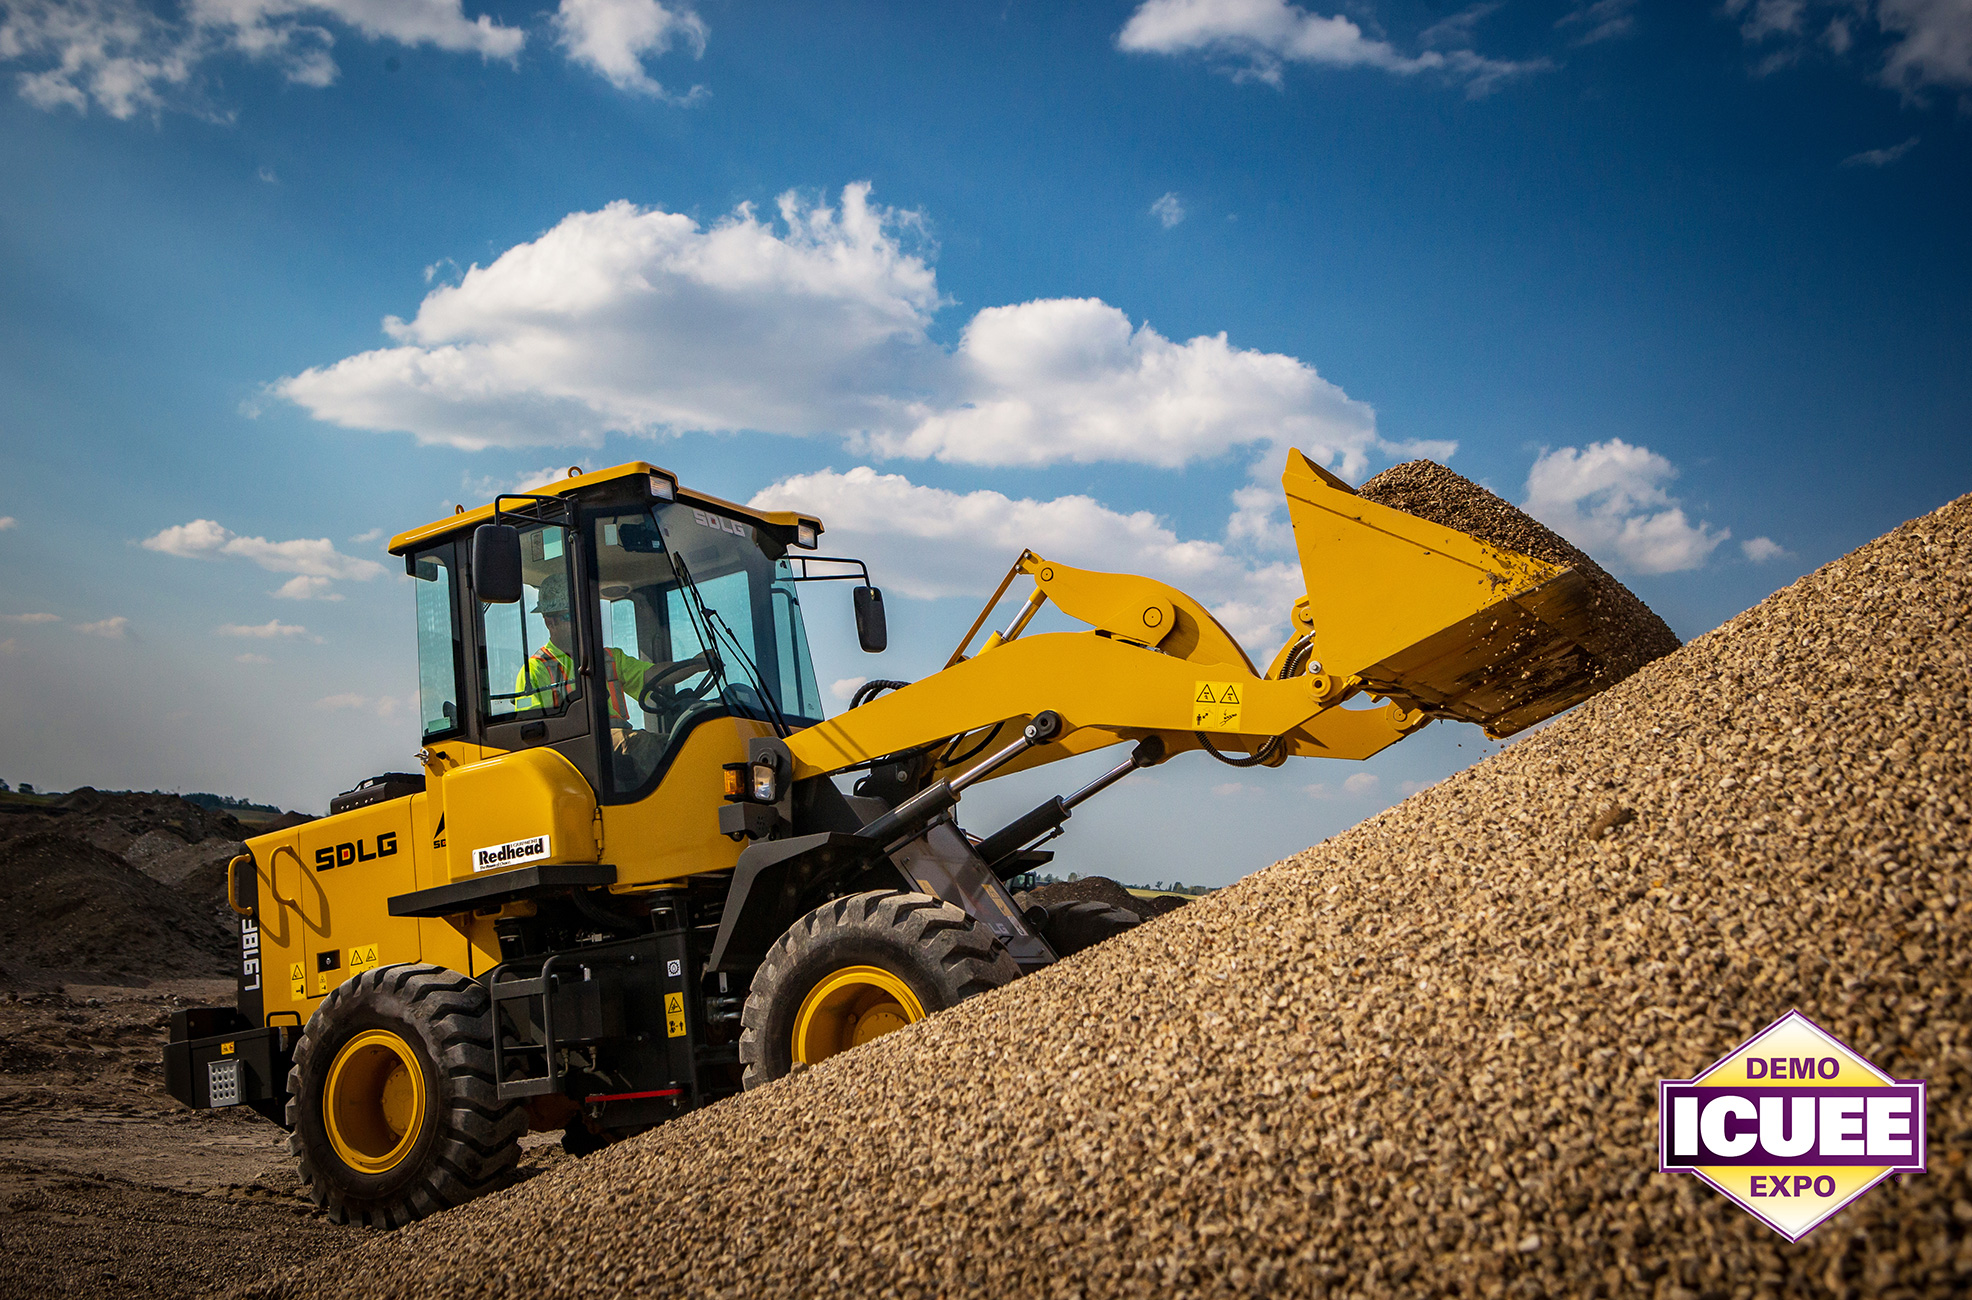 SDLG to show compact loader’s utility prowess at ICUEE 2017